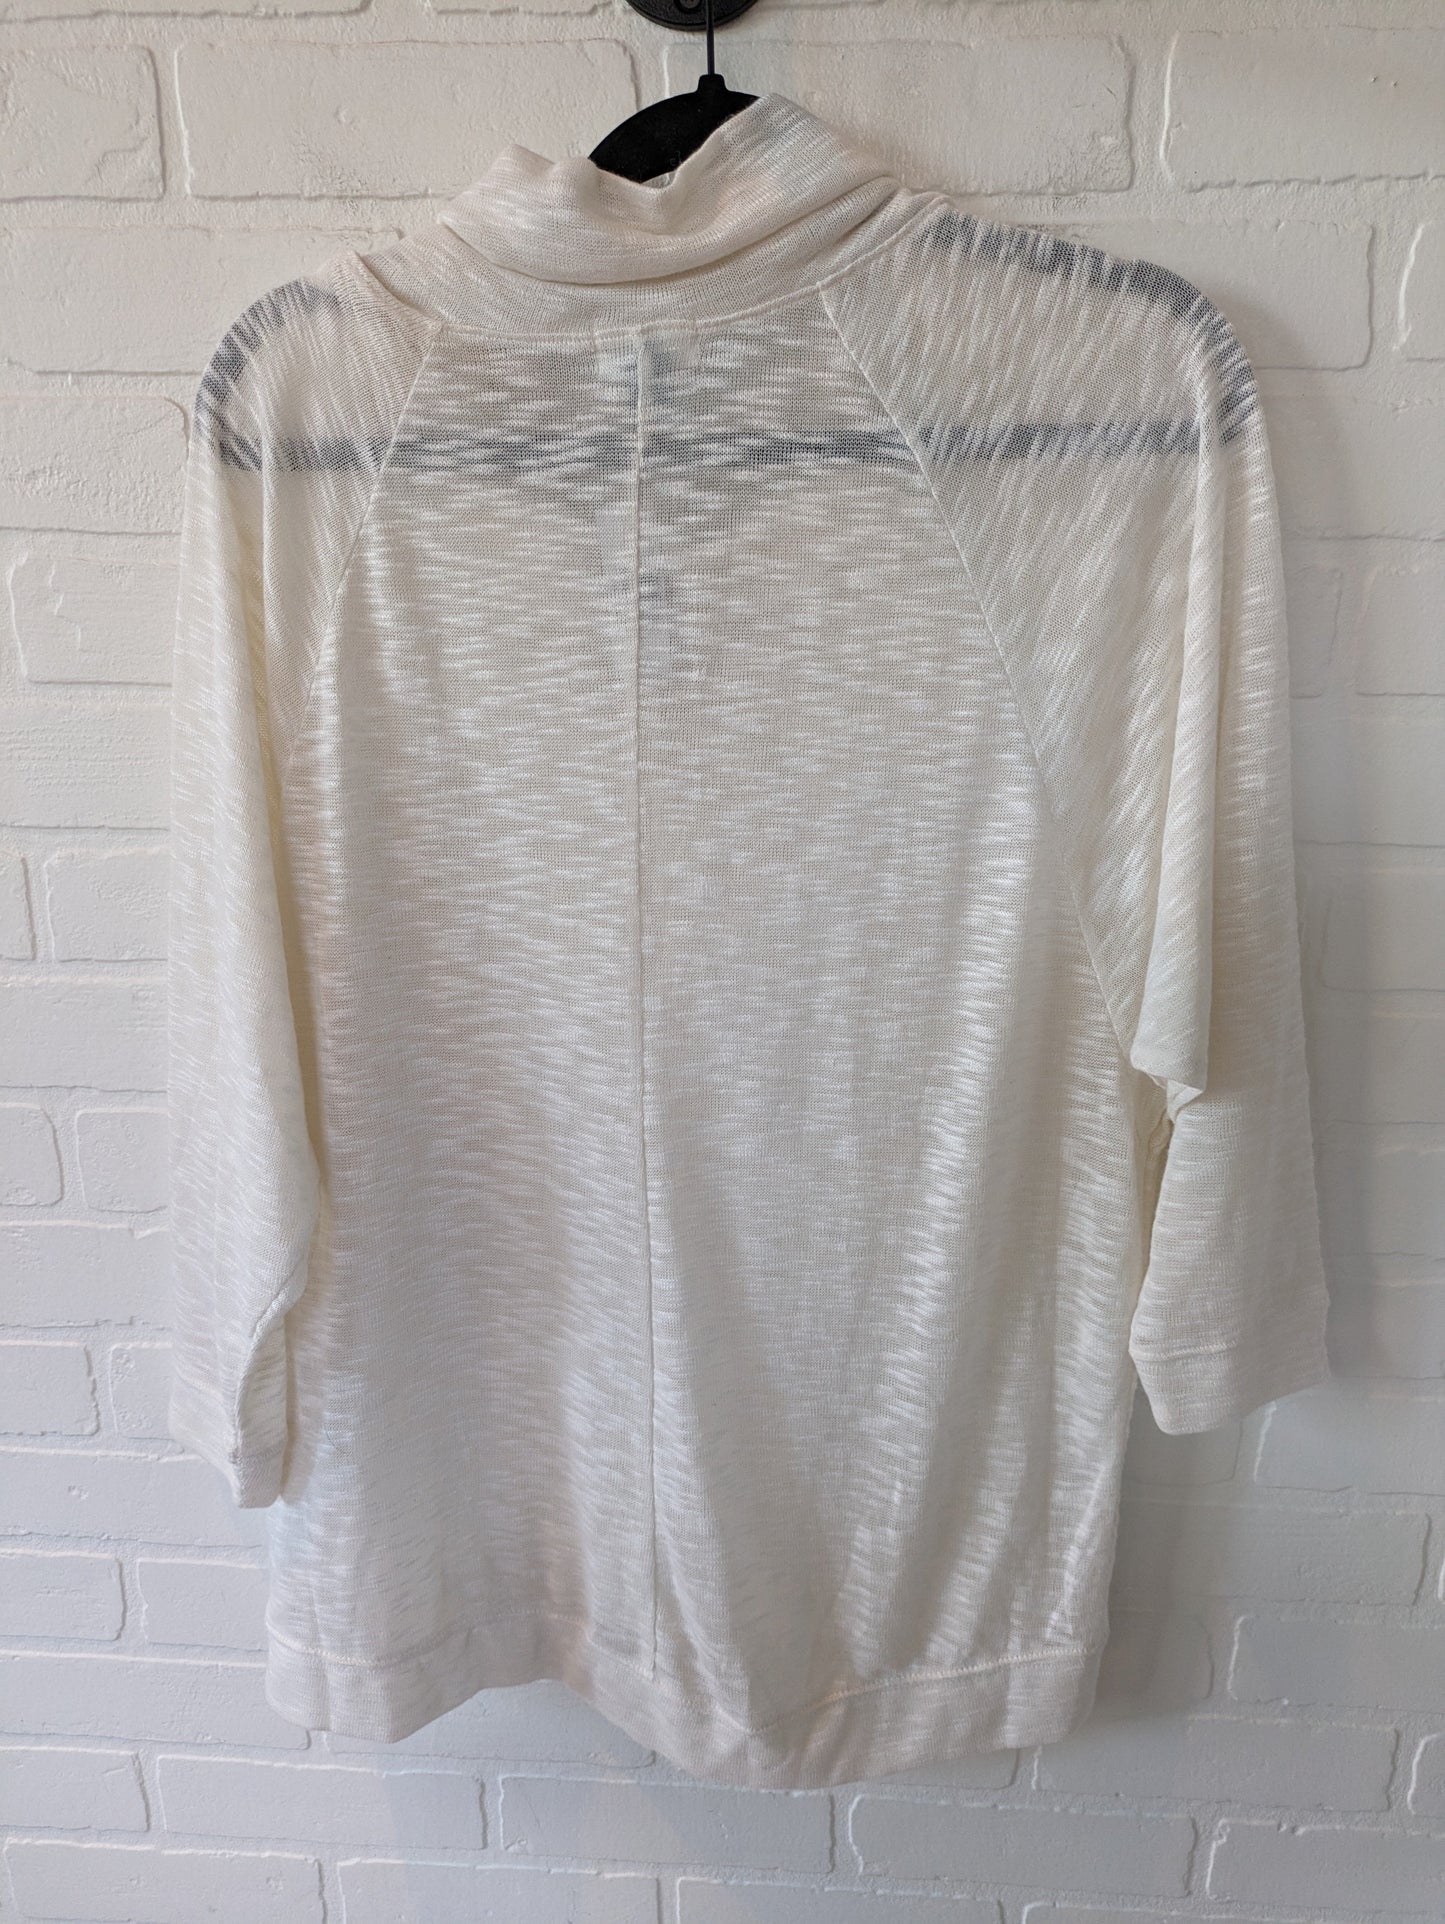 White Sweater Old Navy, Size M